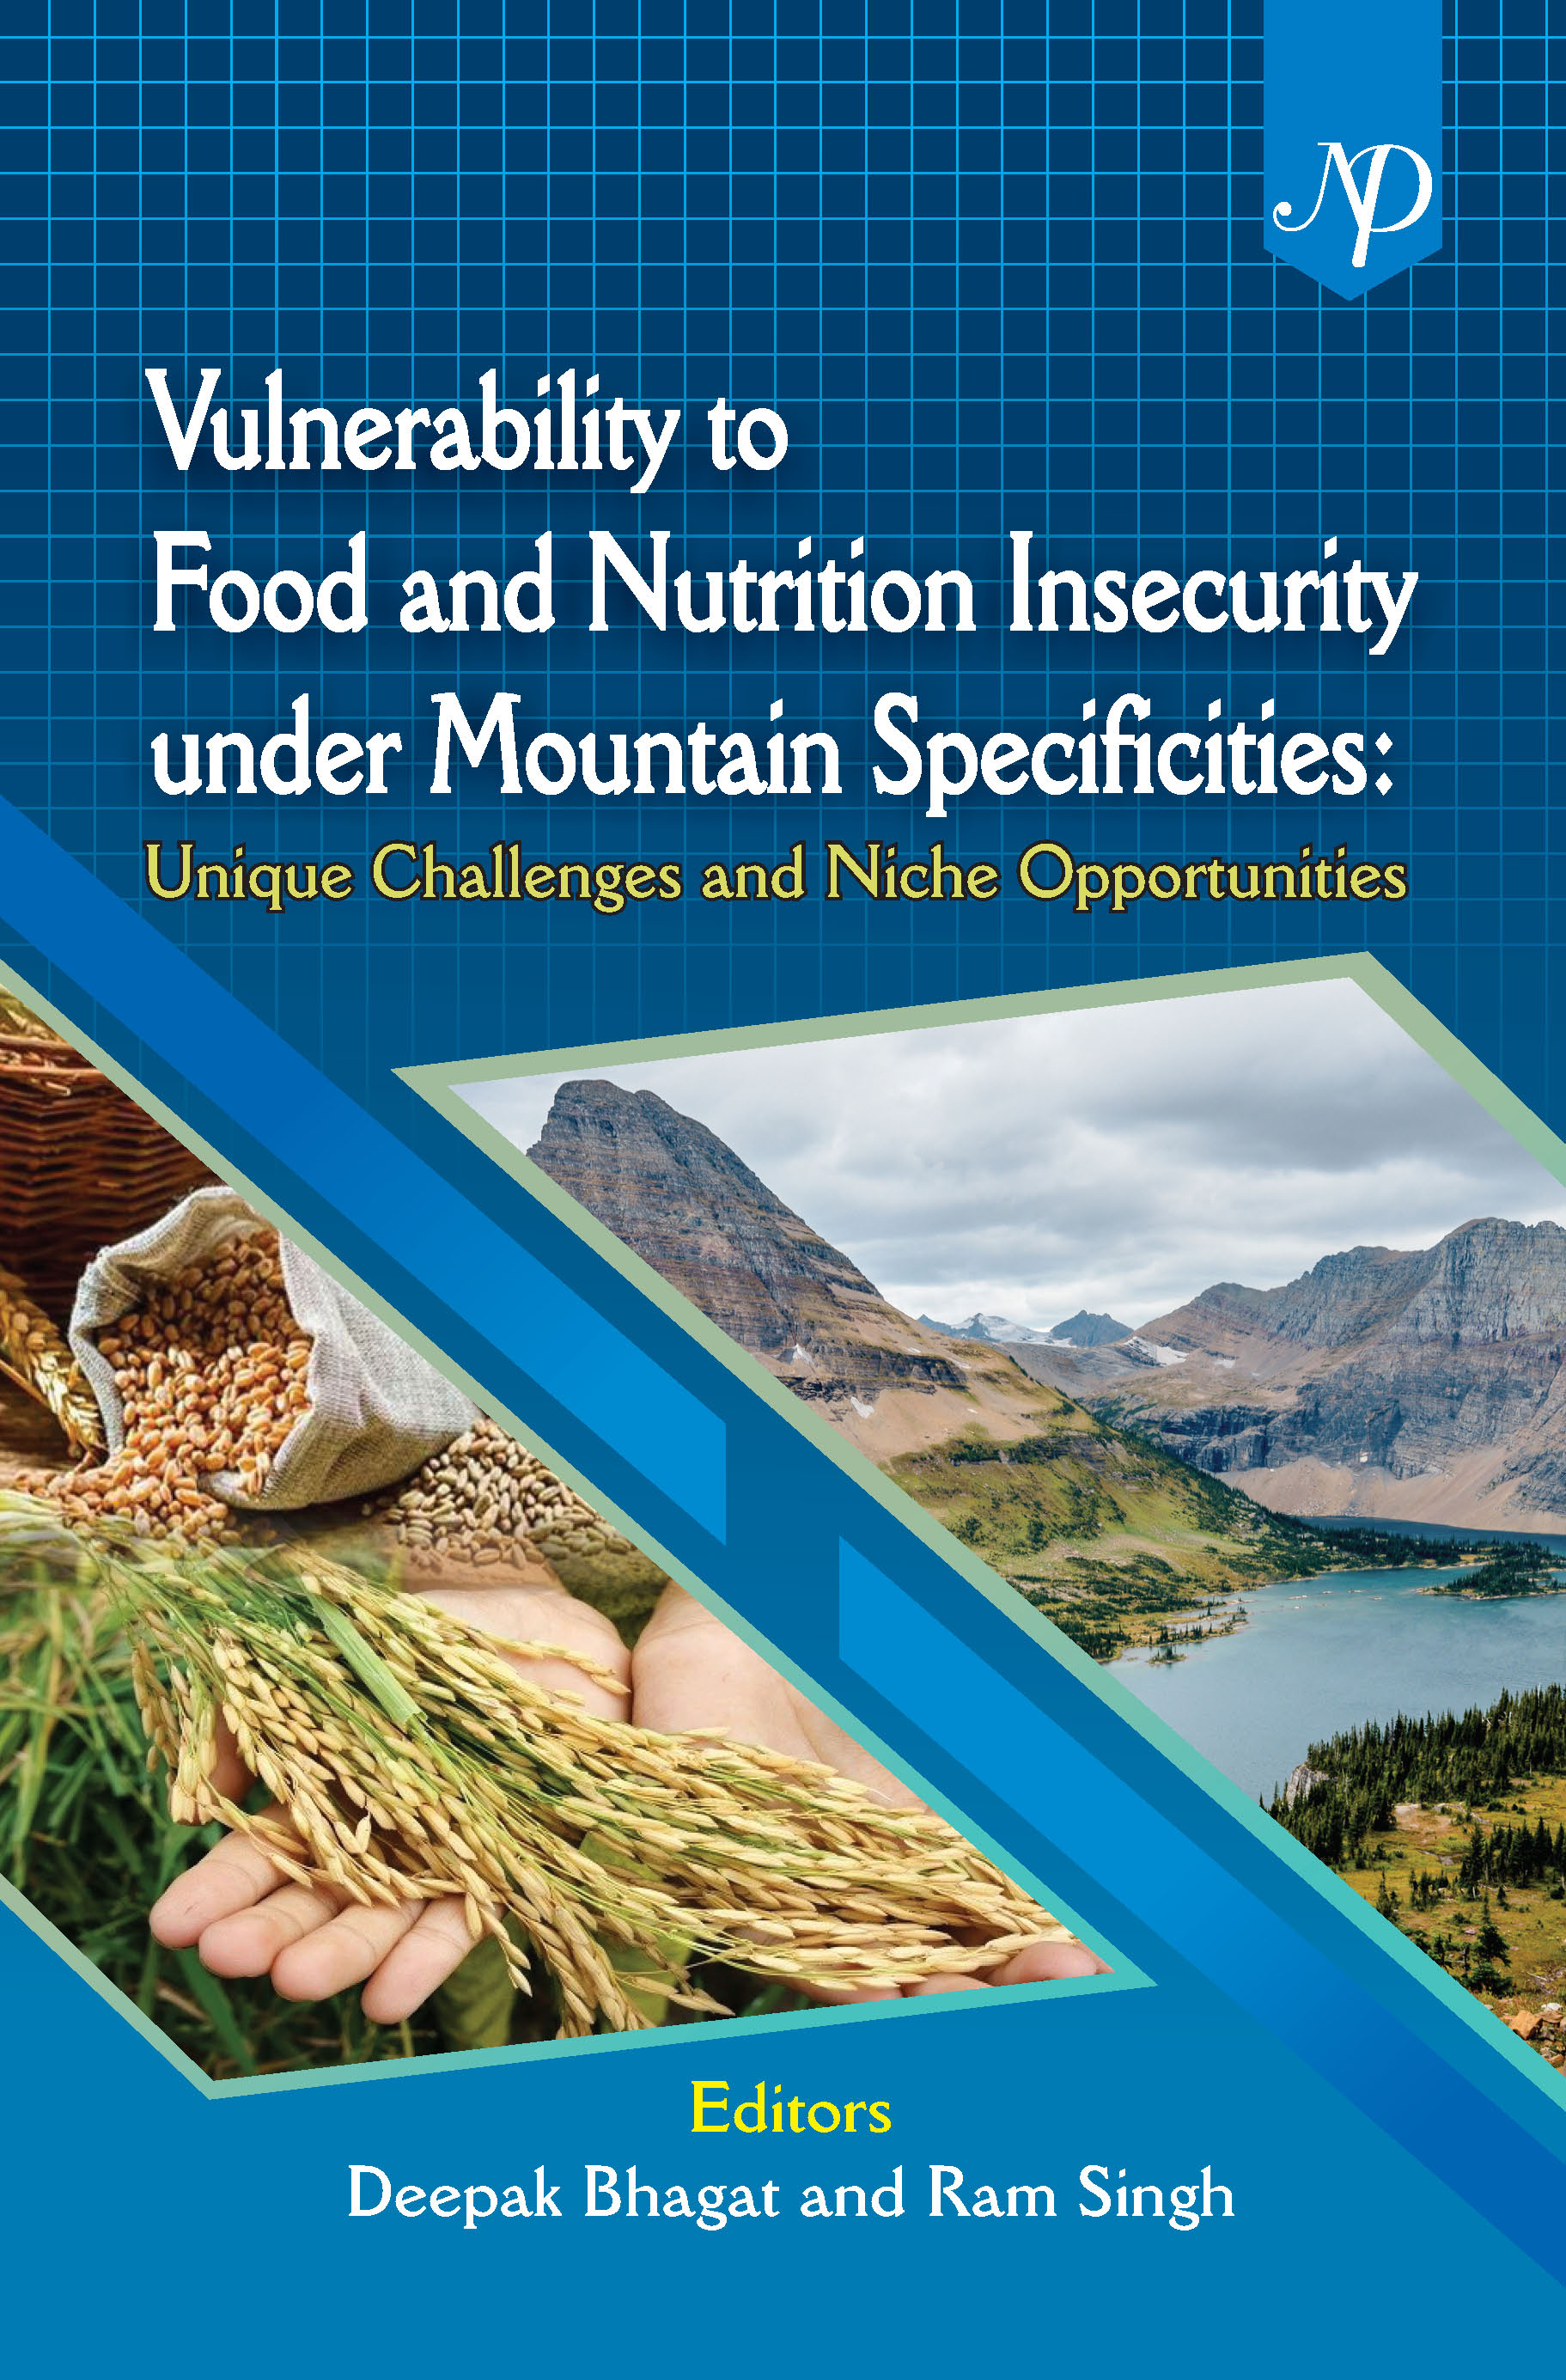 Vulnerability to Food and Nutrition Insecurity under Cover.jpg